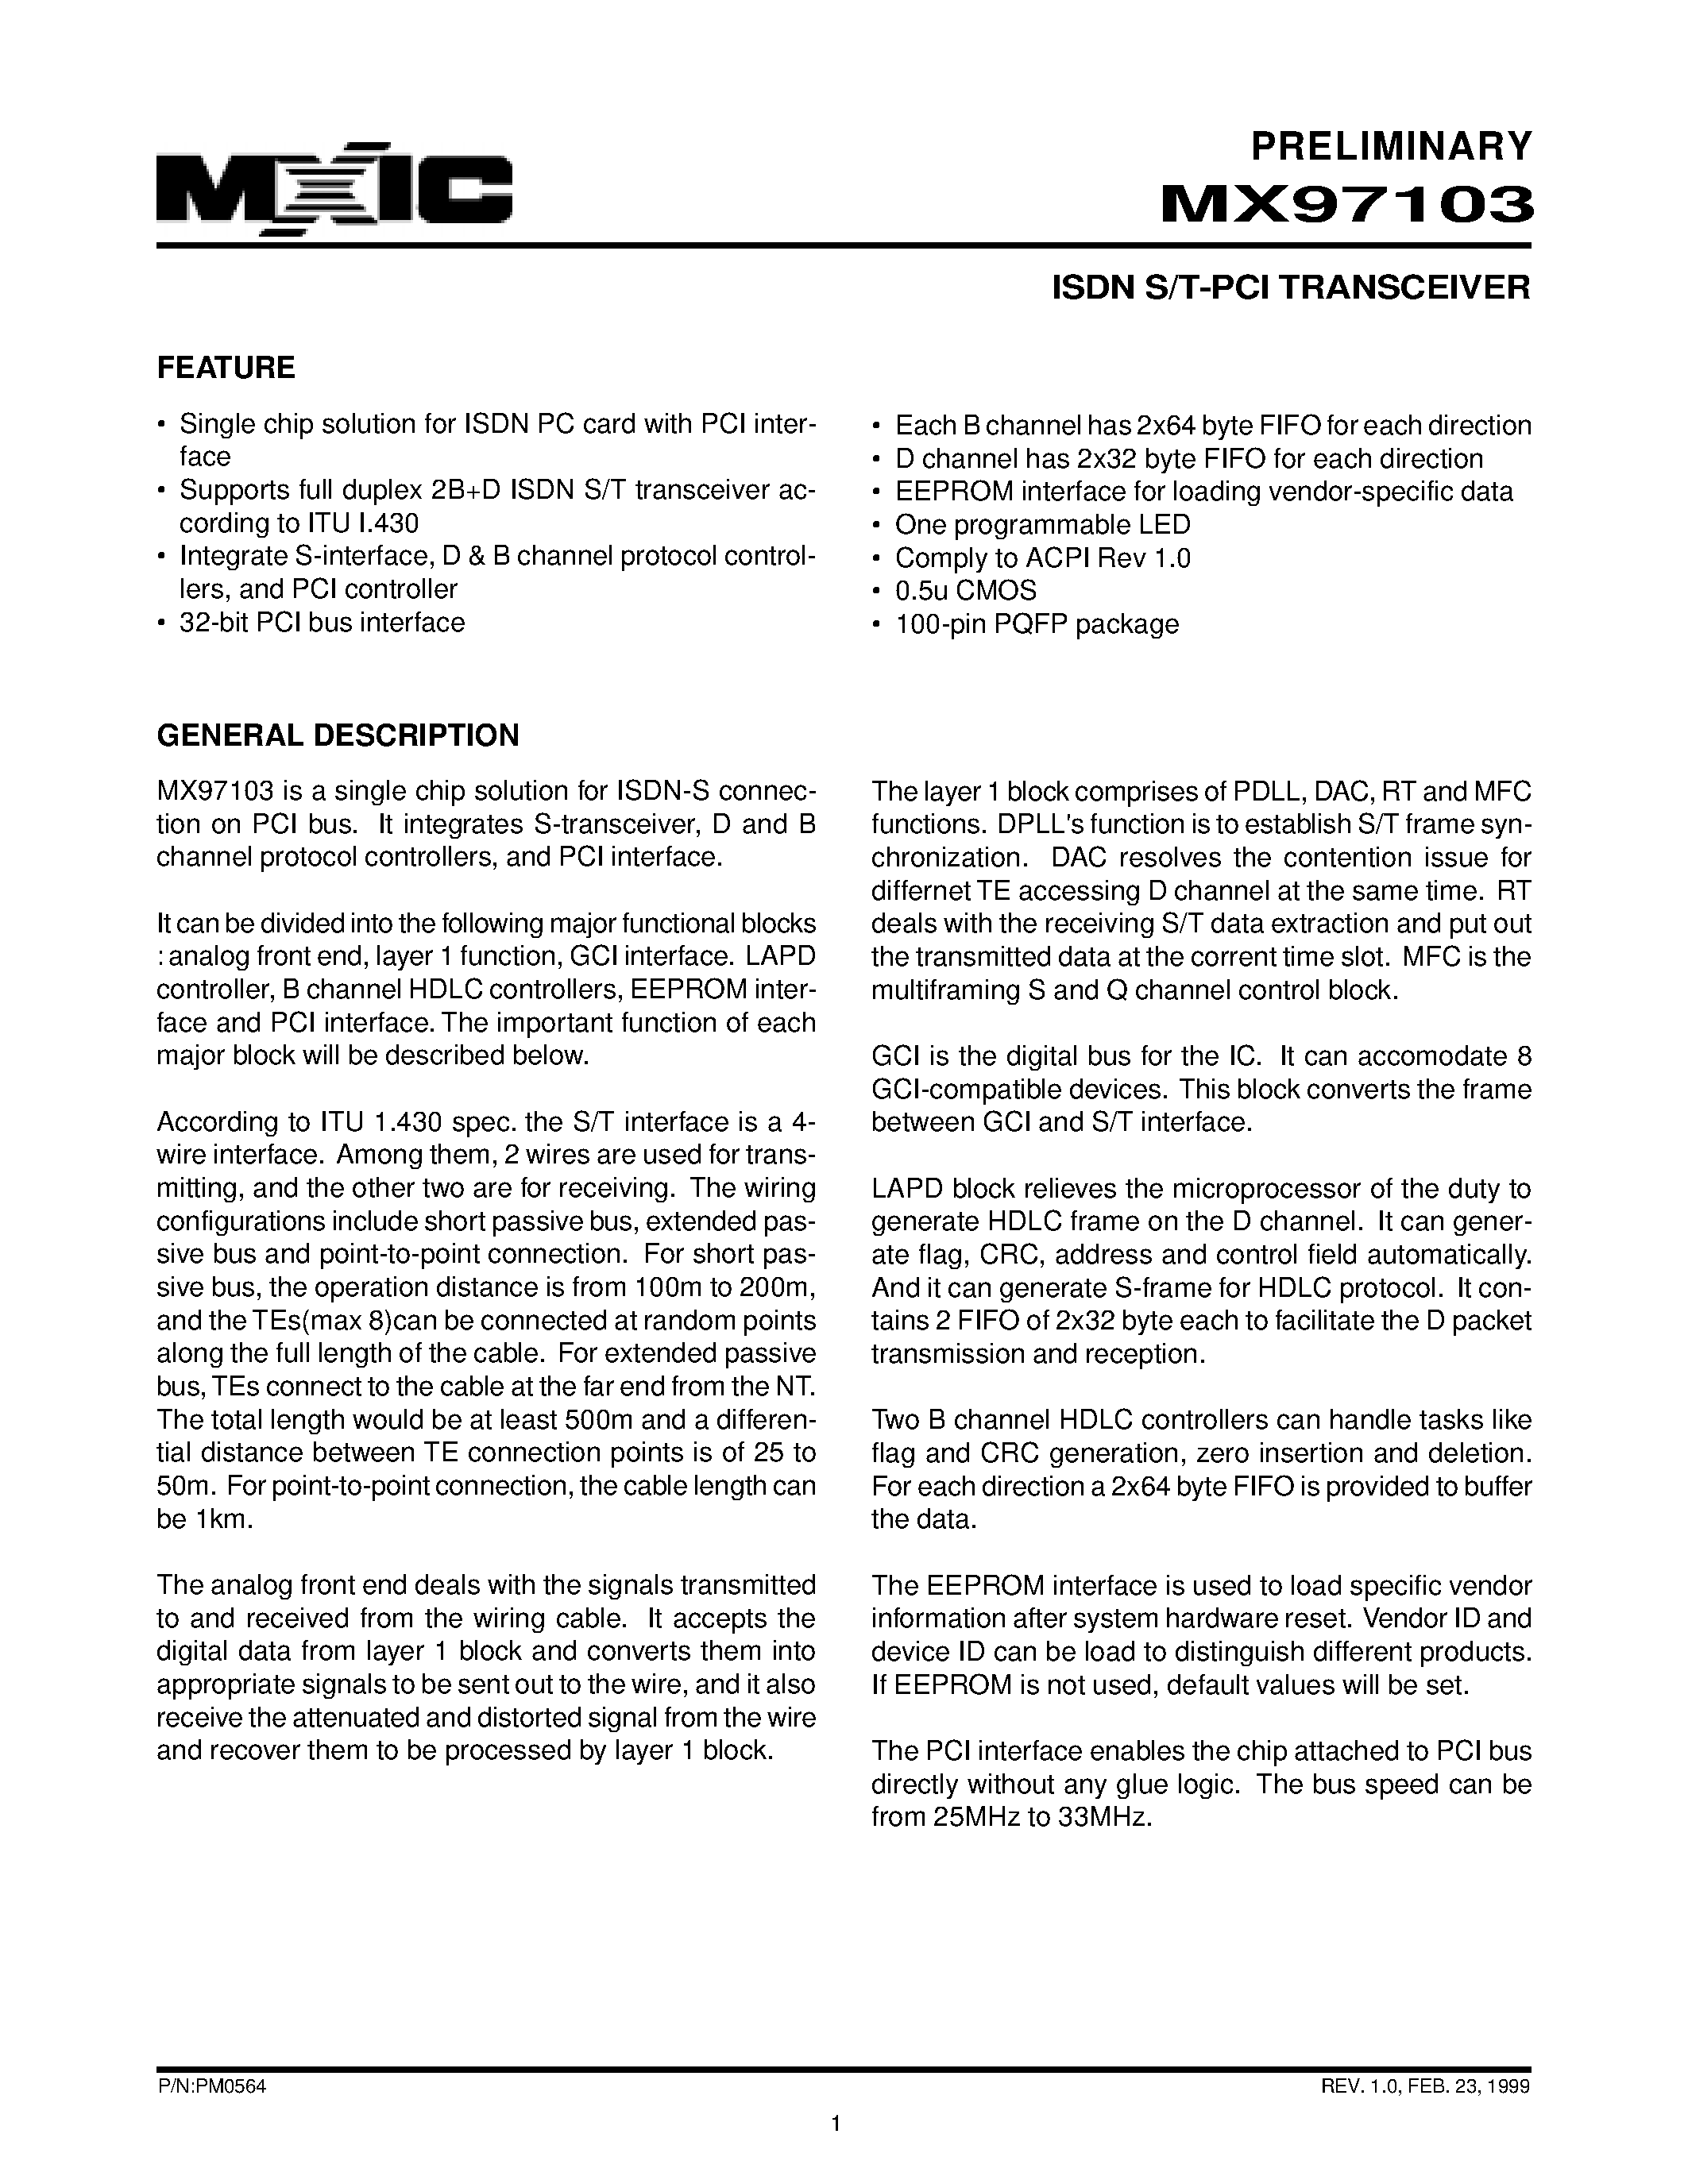 Datasheet MX97103 - ISDN S/T-PCI TRANSCEIVER page 1